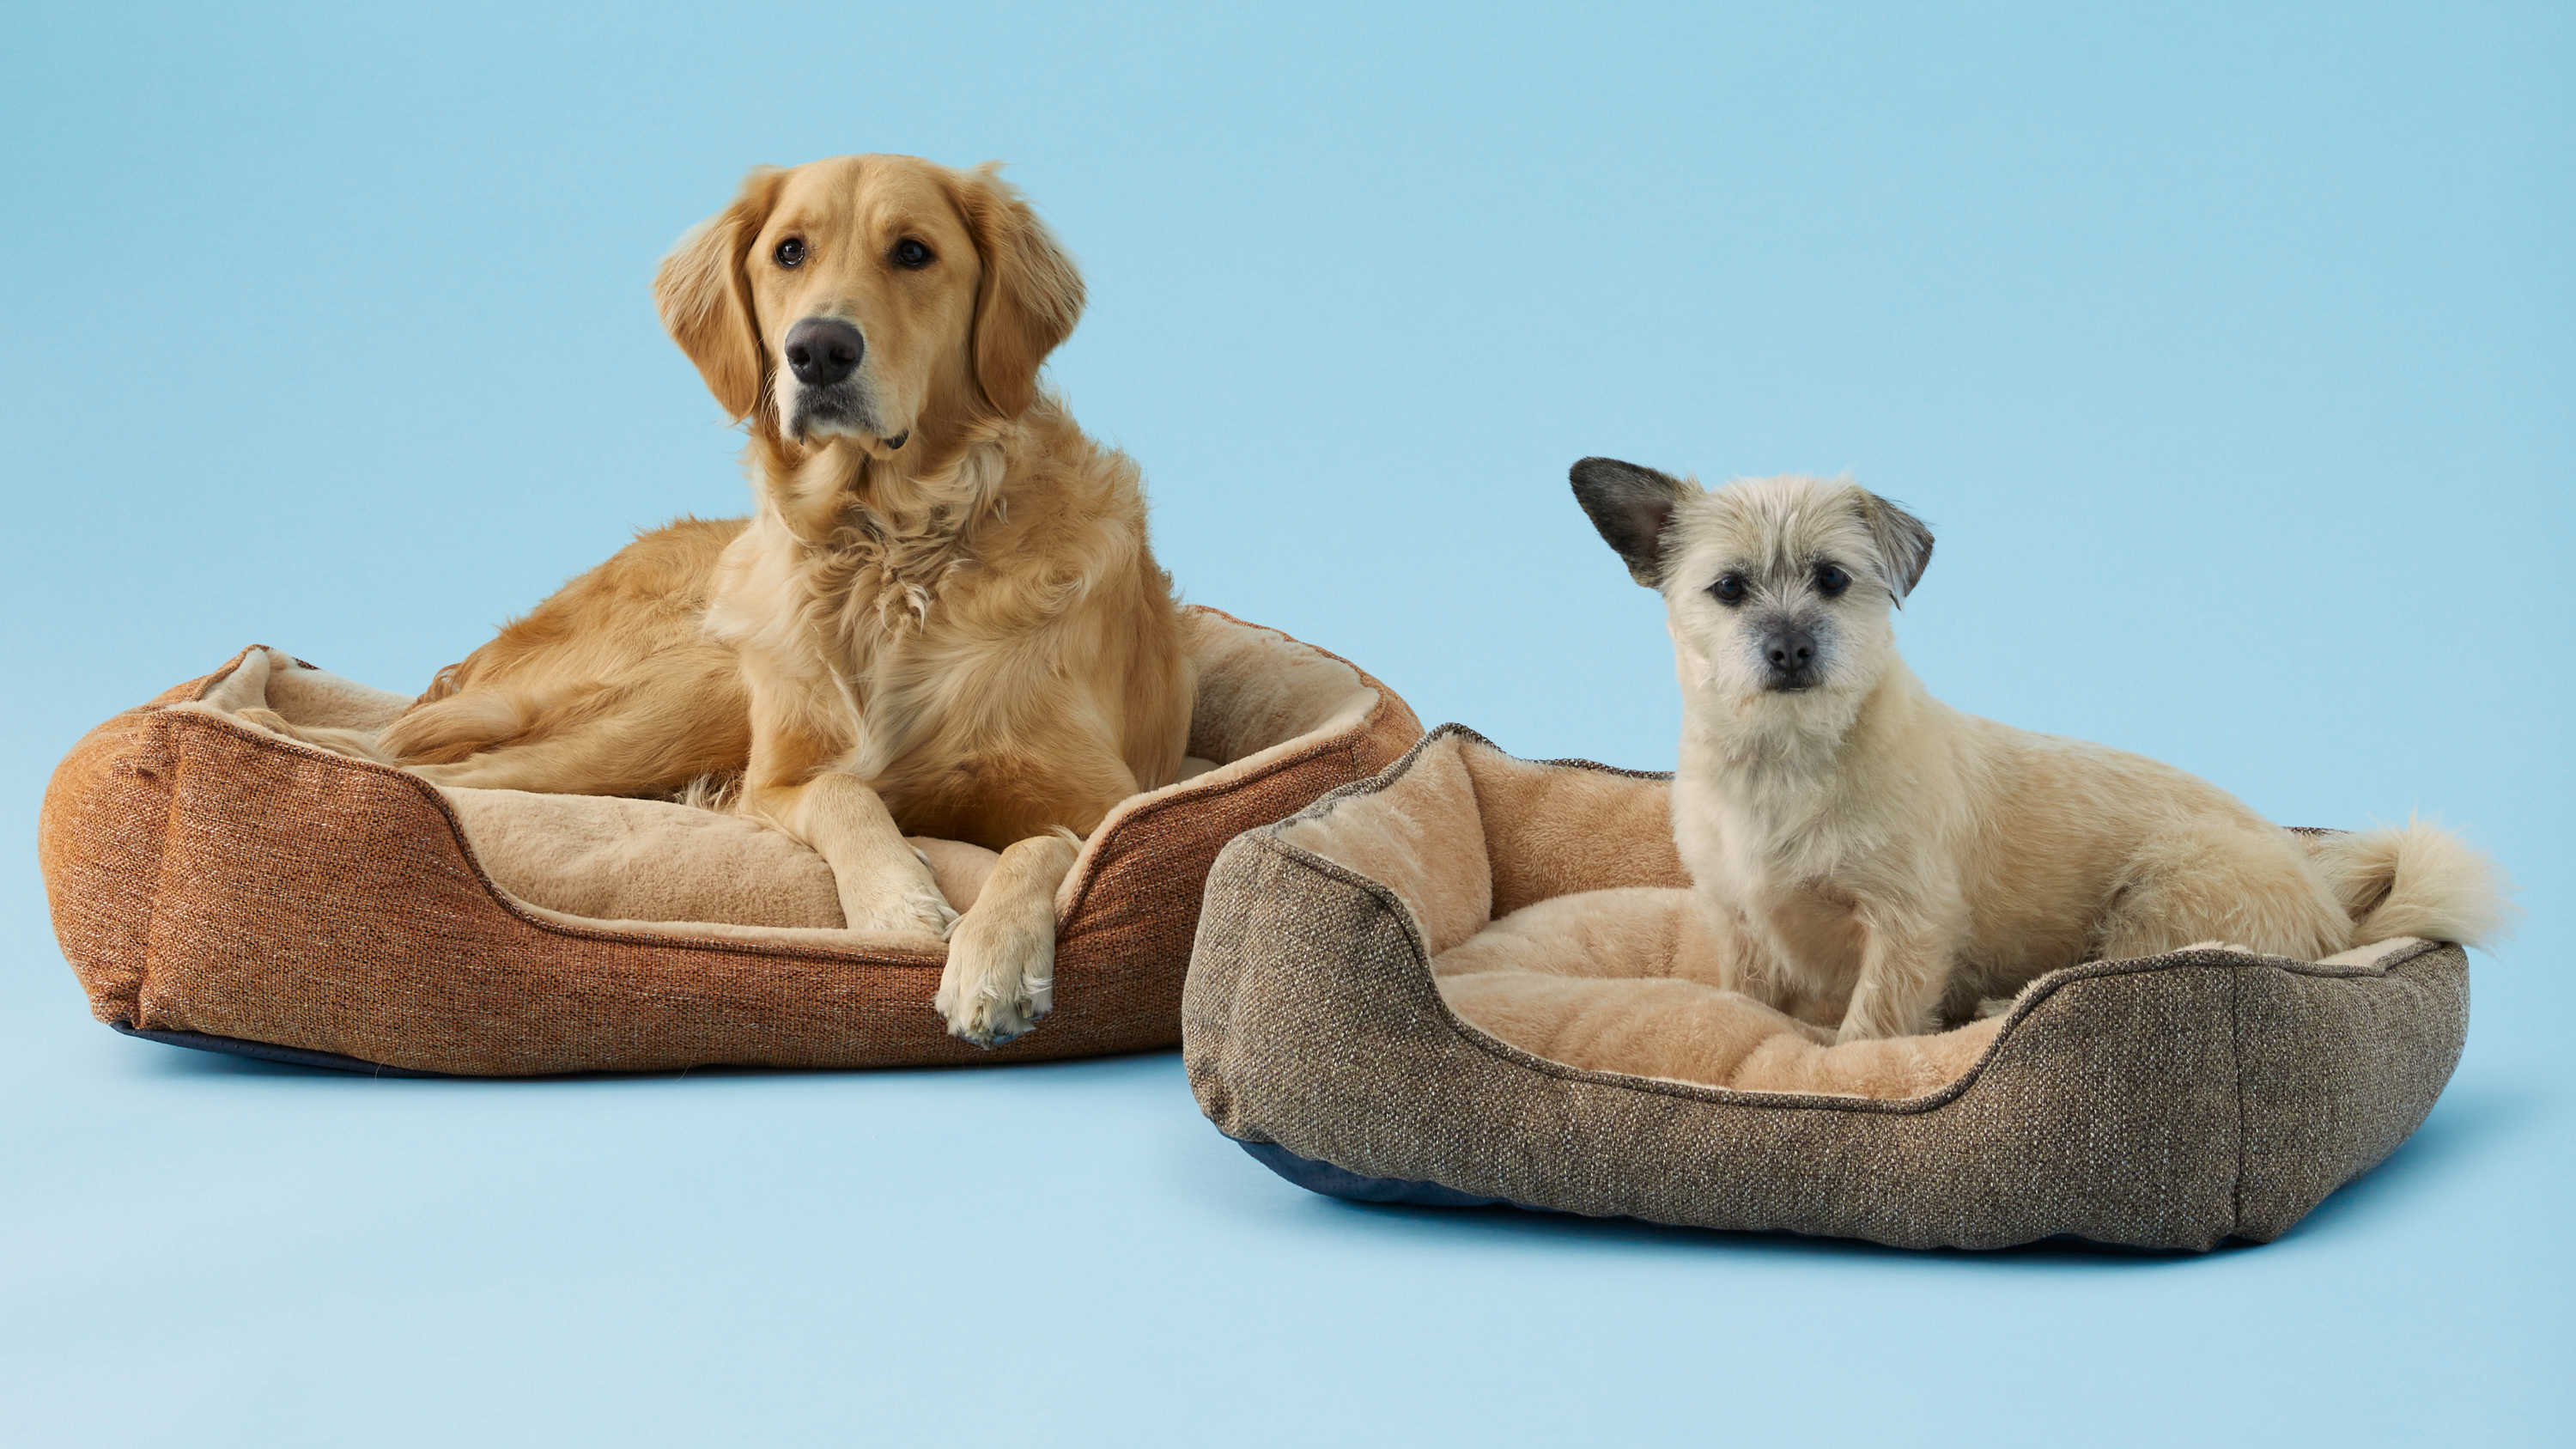 Gucci dog bed for sale, luxury dog beds